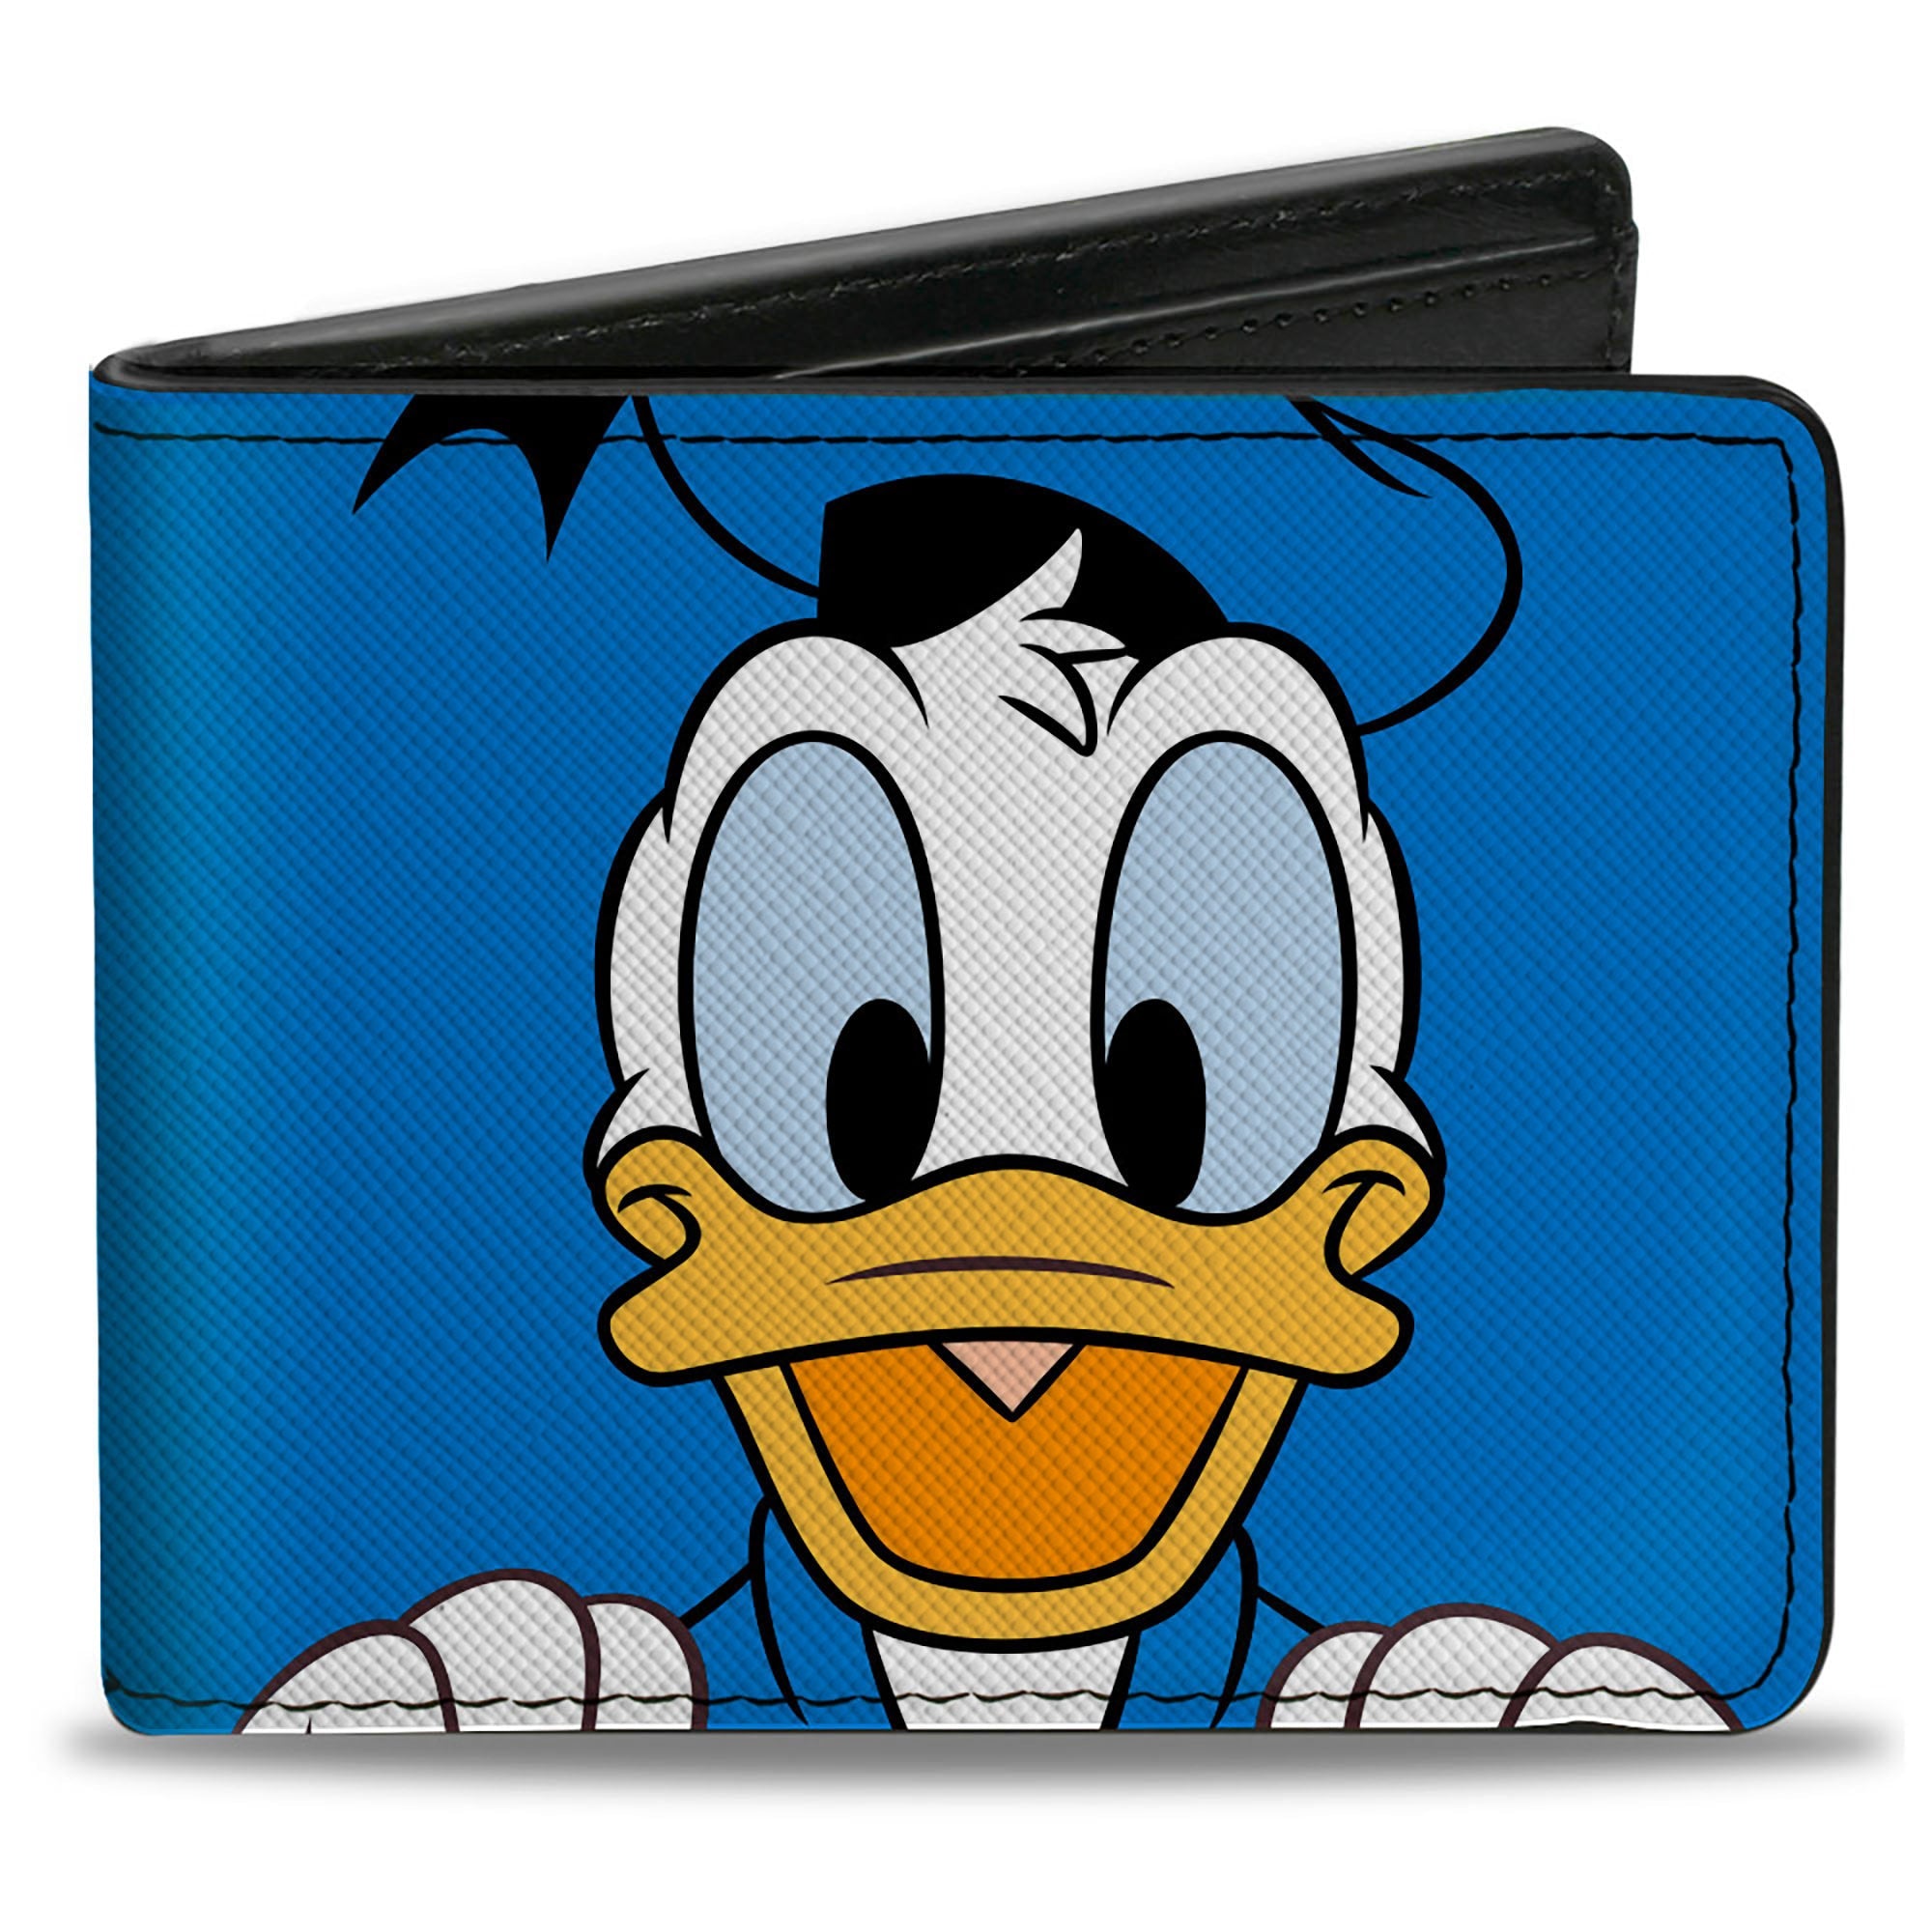 Bi-Fold Wallet - Donald Duck Character Face Close-Up and Autograph Blue